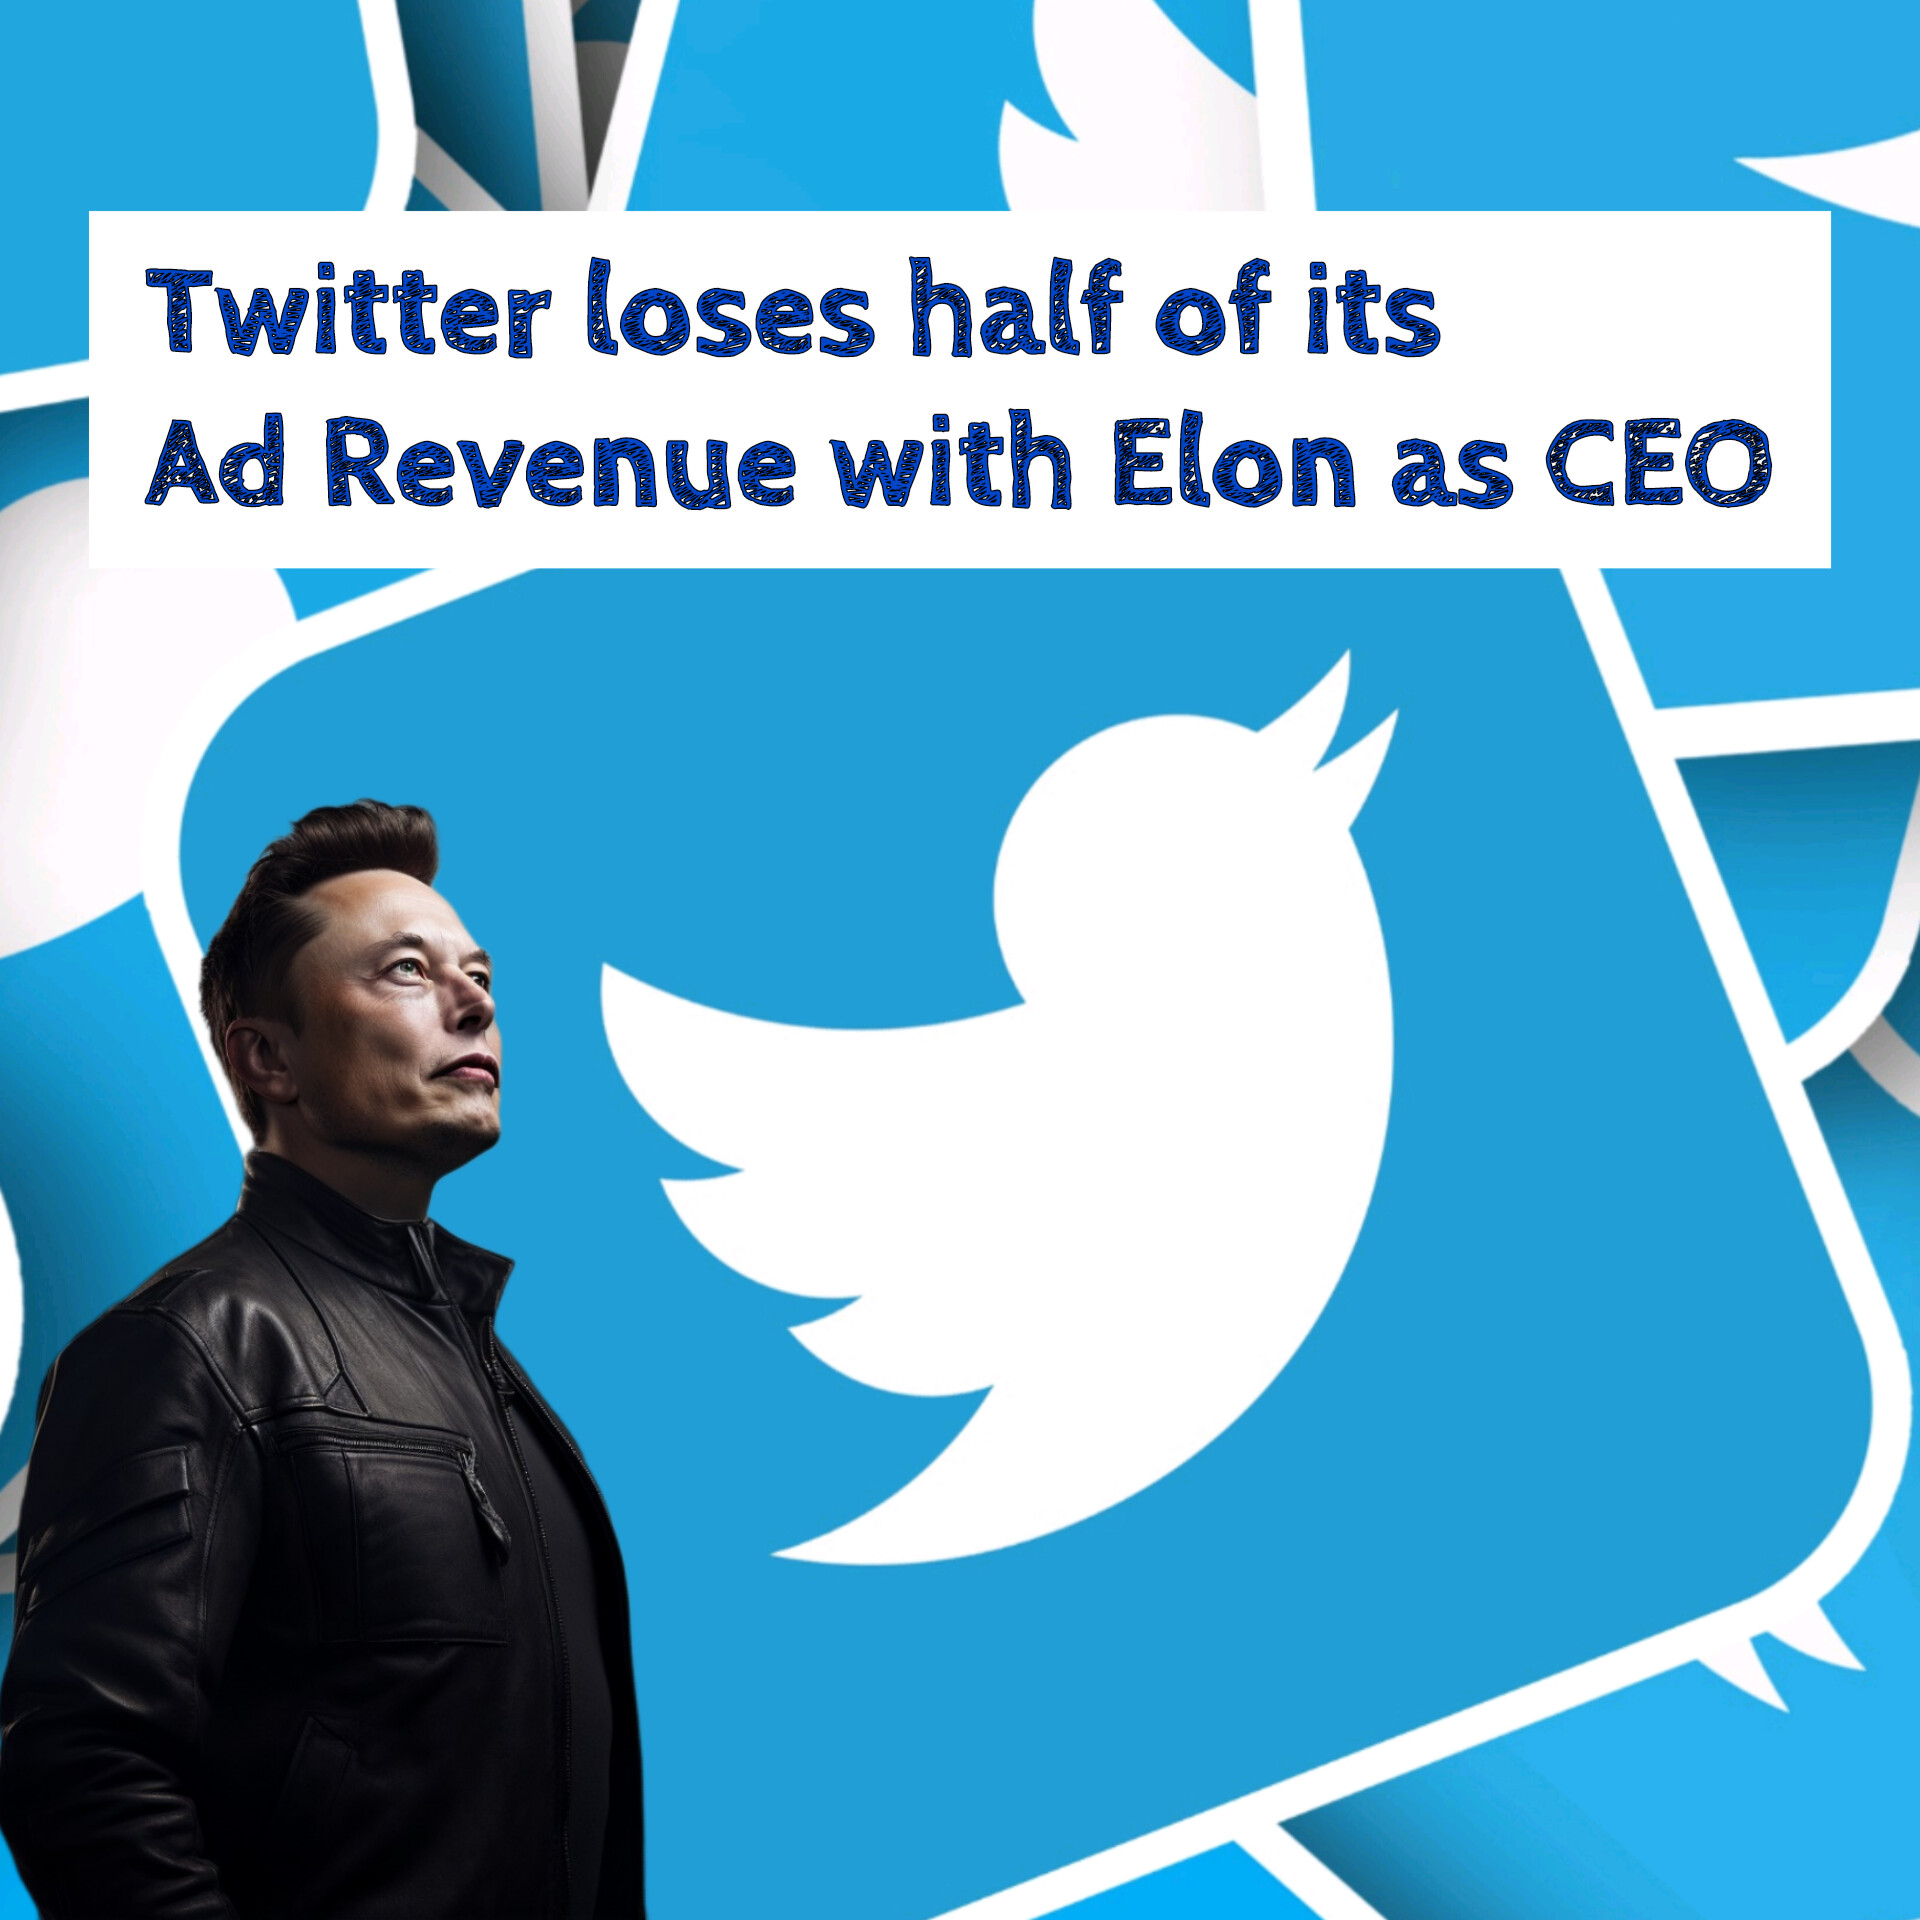 Twitter's Advertising Revenue Takes a Hit After Elon Musk's Acquisition